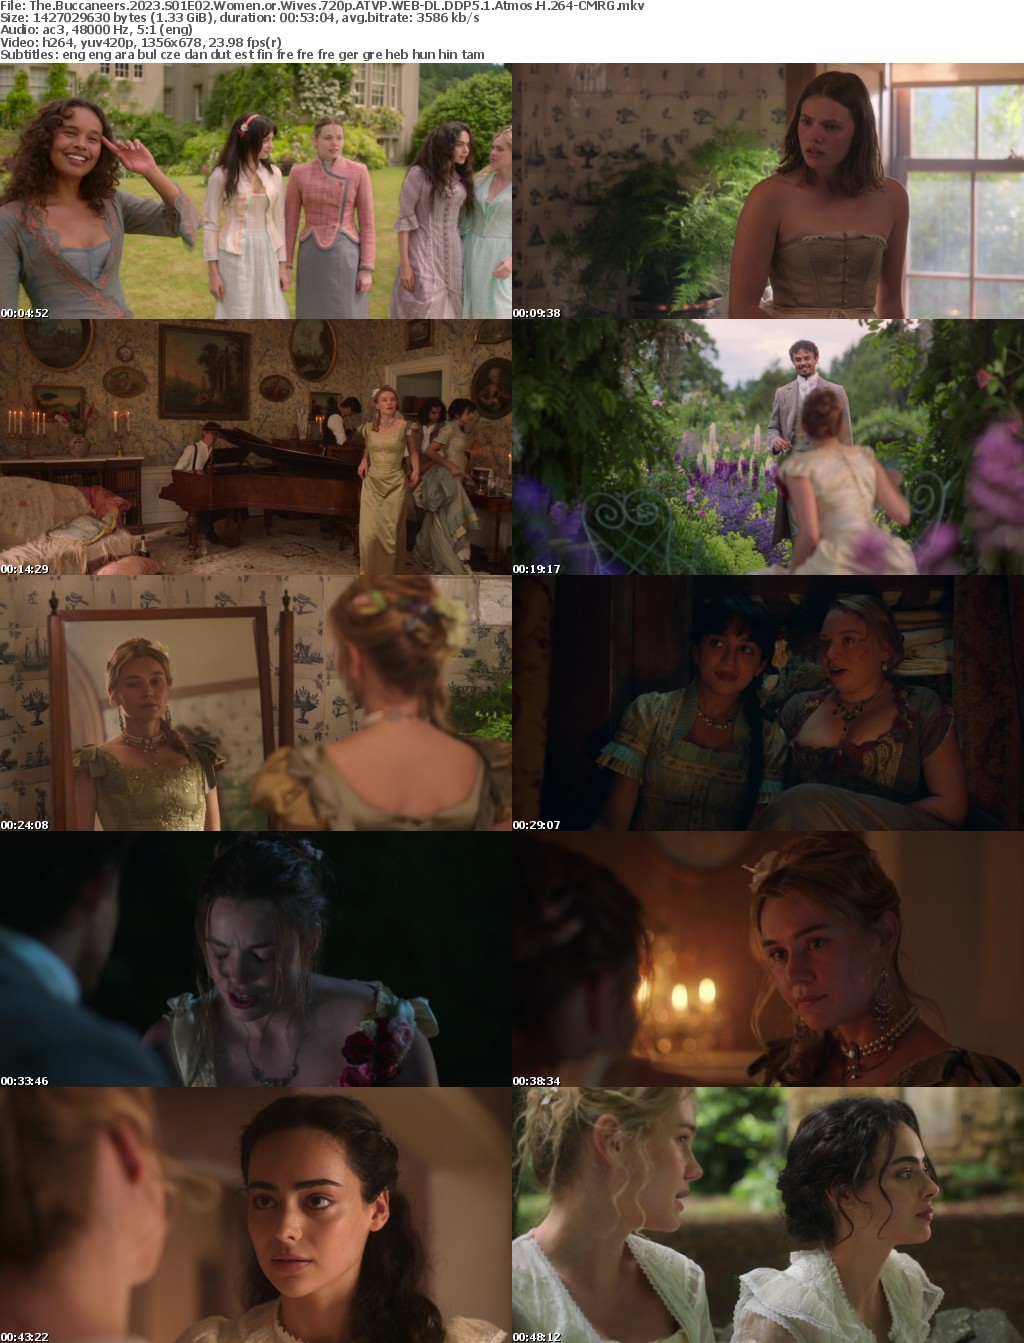 The Buccaneers 2023 S01E02 Women or Wives 720p ATVP WEB-DL DDP5 1 Atmos H 264-CMRG